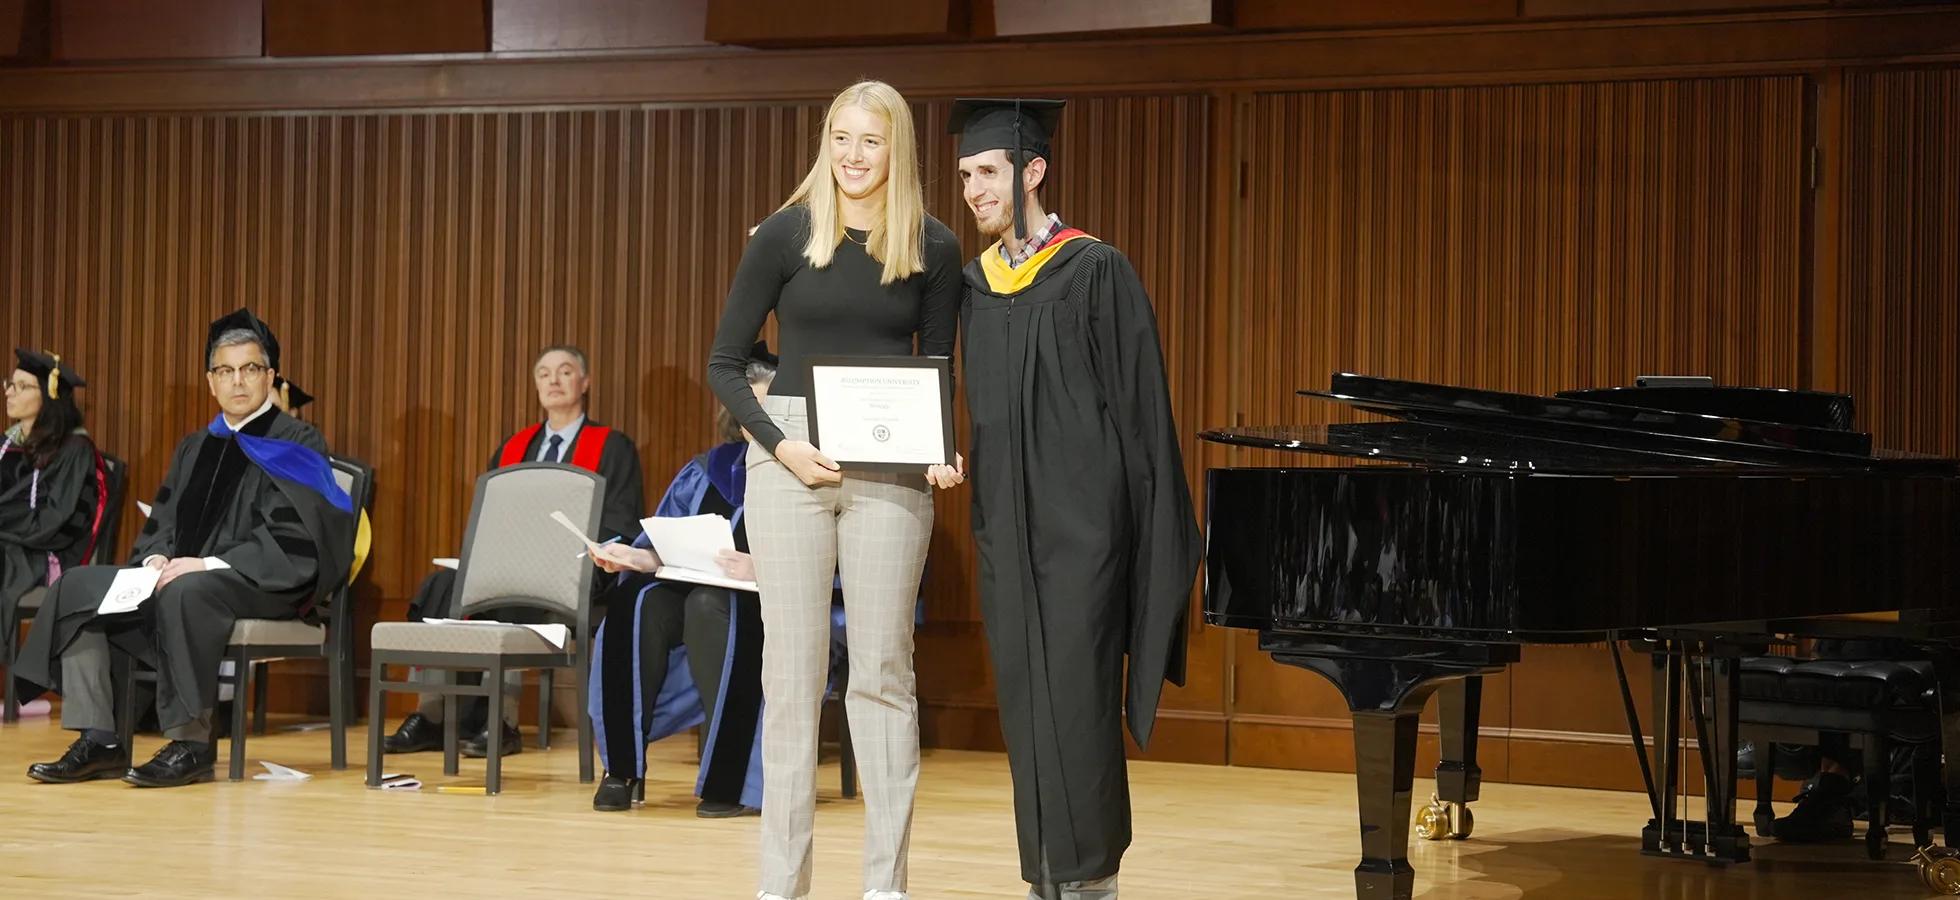 On April 15, 78 Assumption students were recognized with awards at the 40th Annual Honors Convocation.